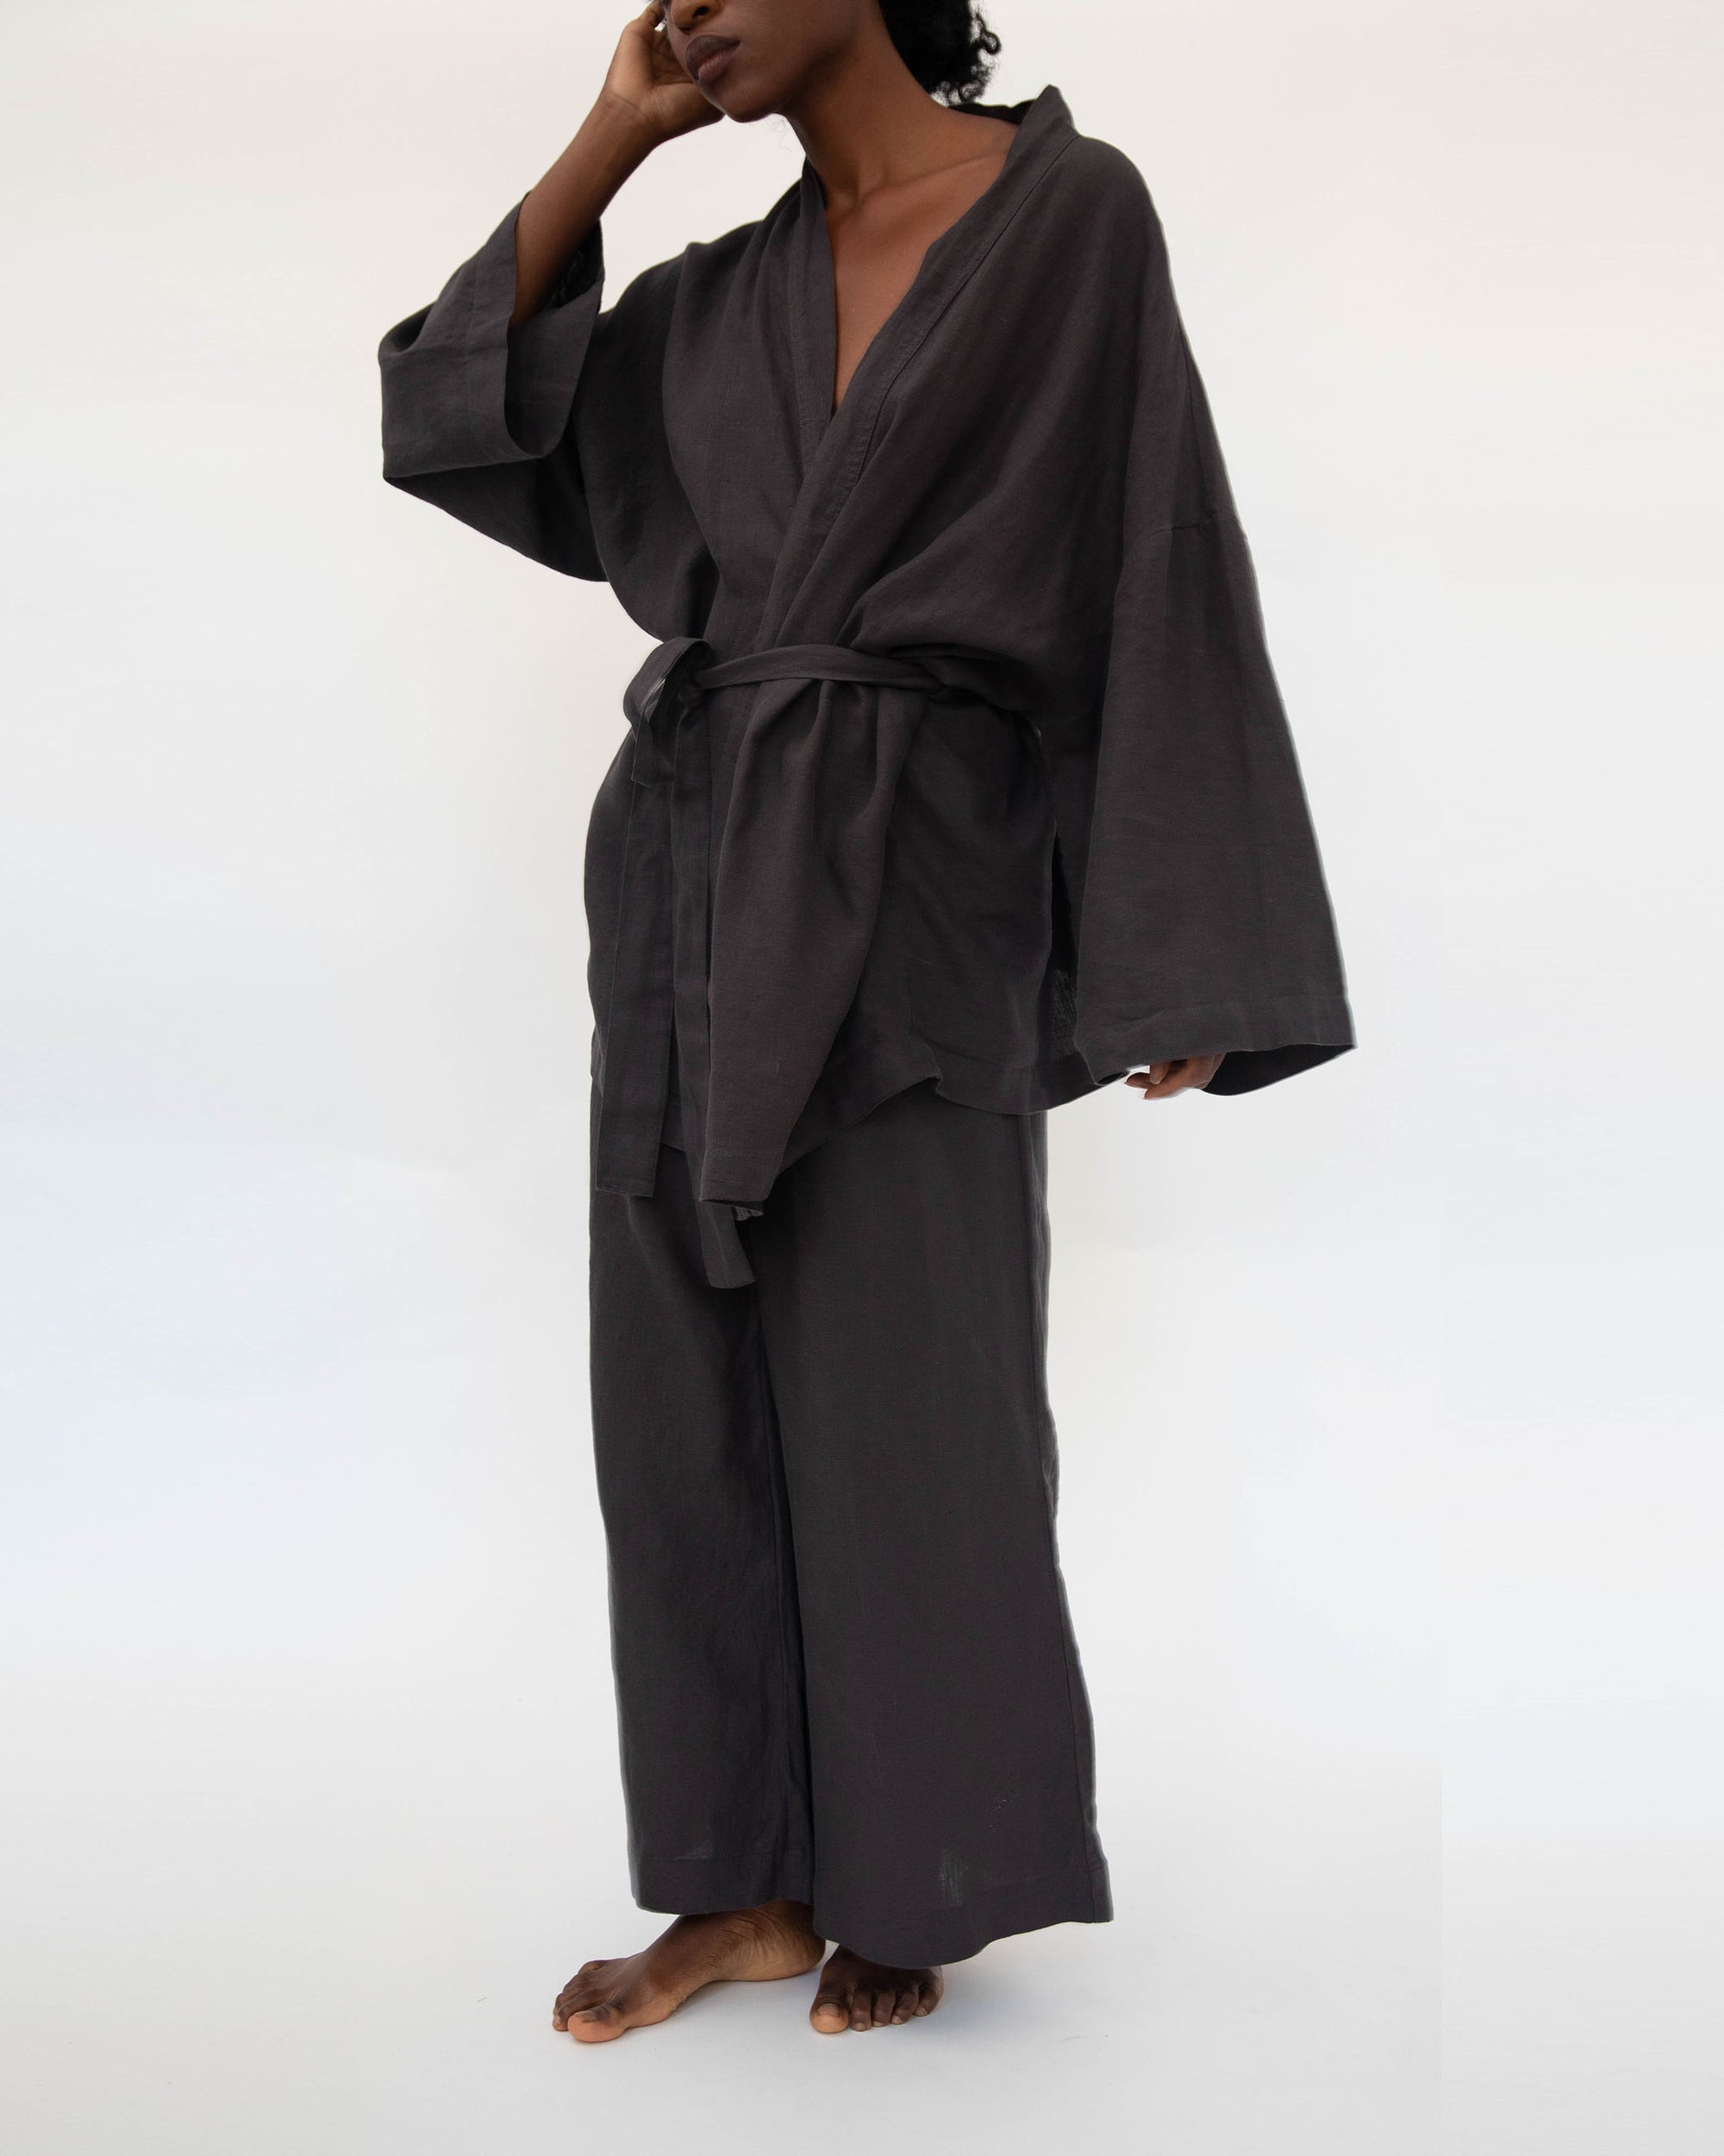 Kimono style loungwear set (top and pants) on model in charcoal black